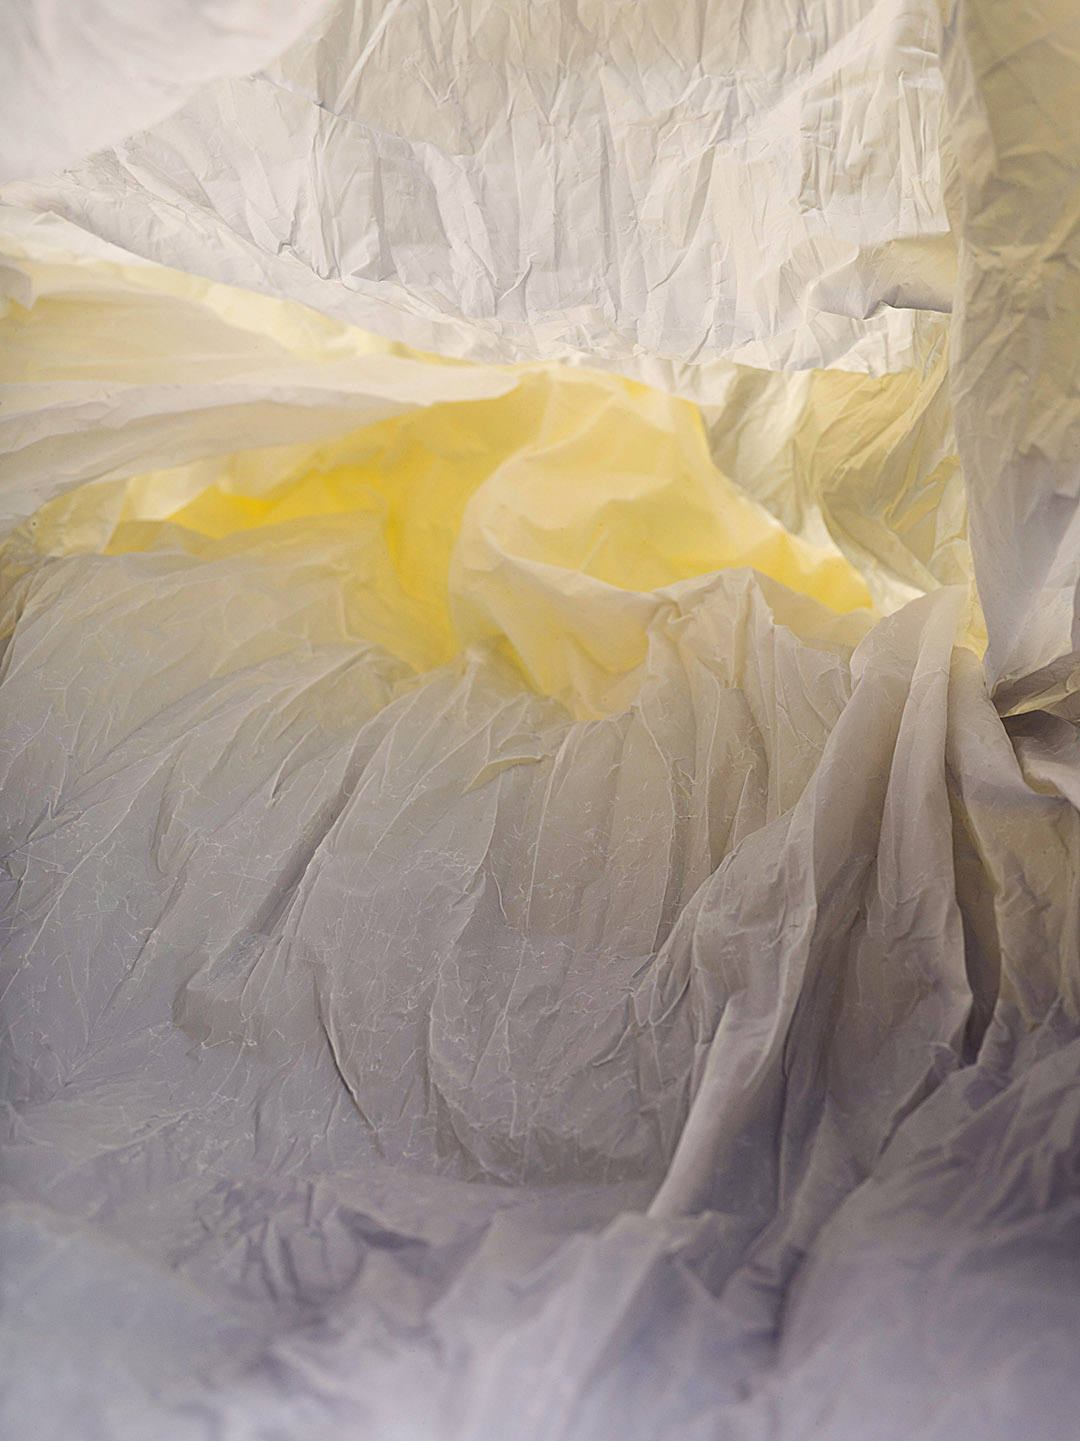 These Magical Landscapes Are Actually Photos Of Plastic Bags